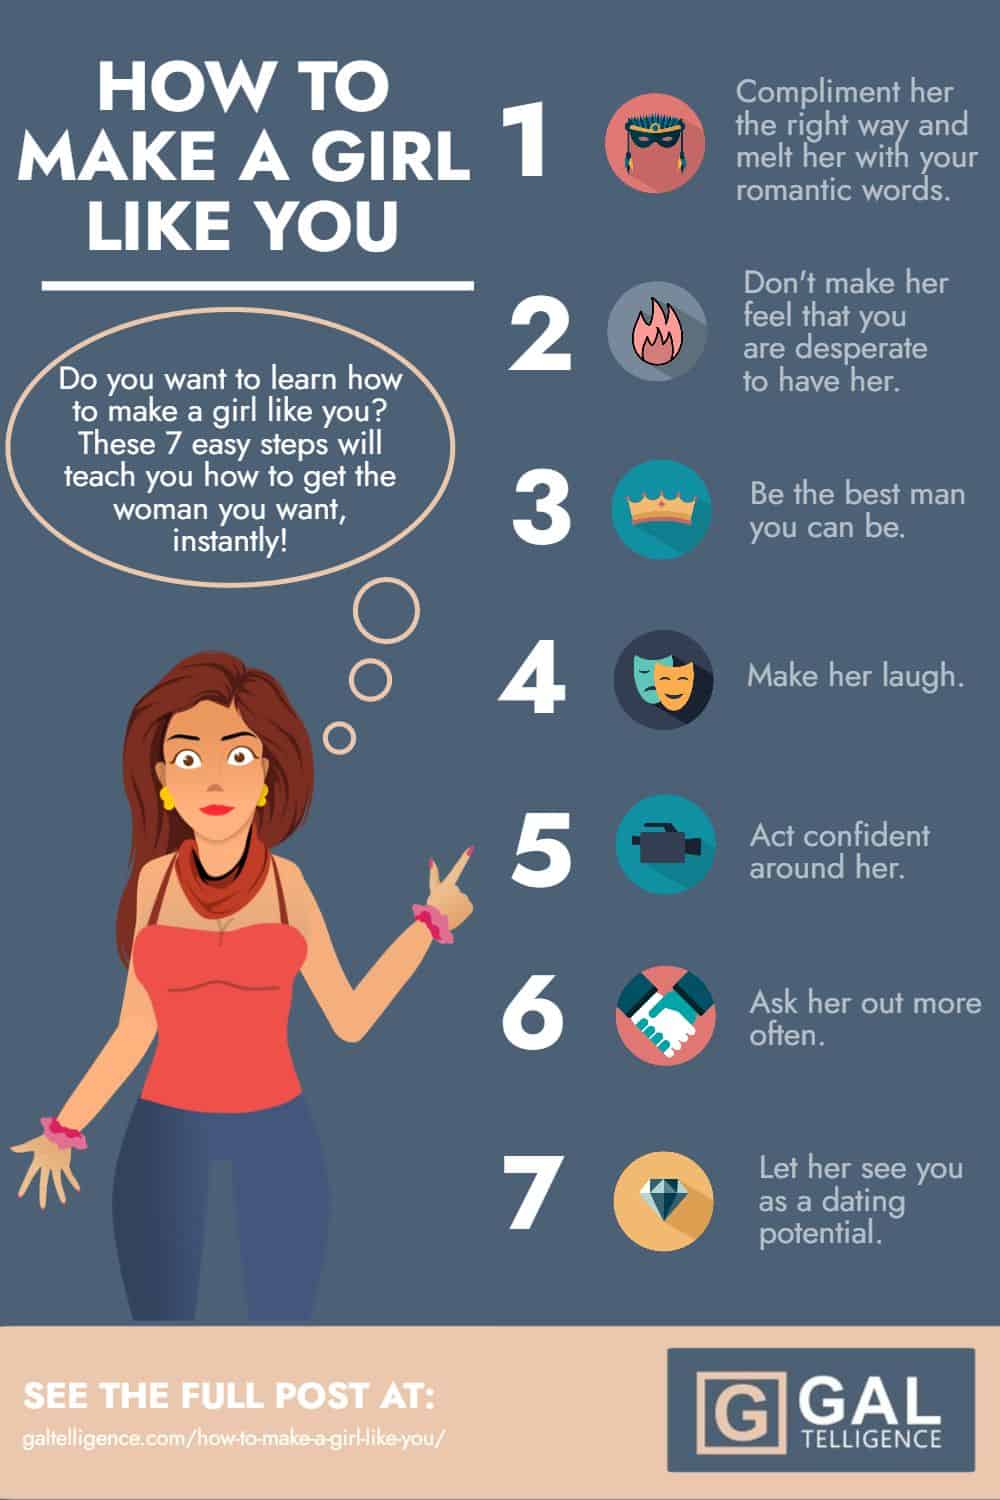 How to make a girl like you - Infographic